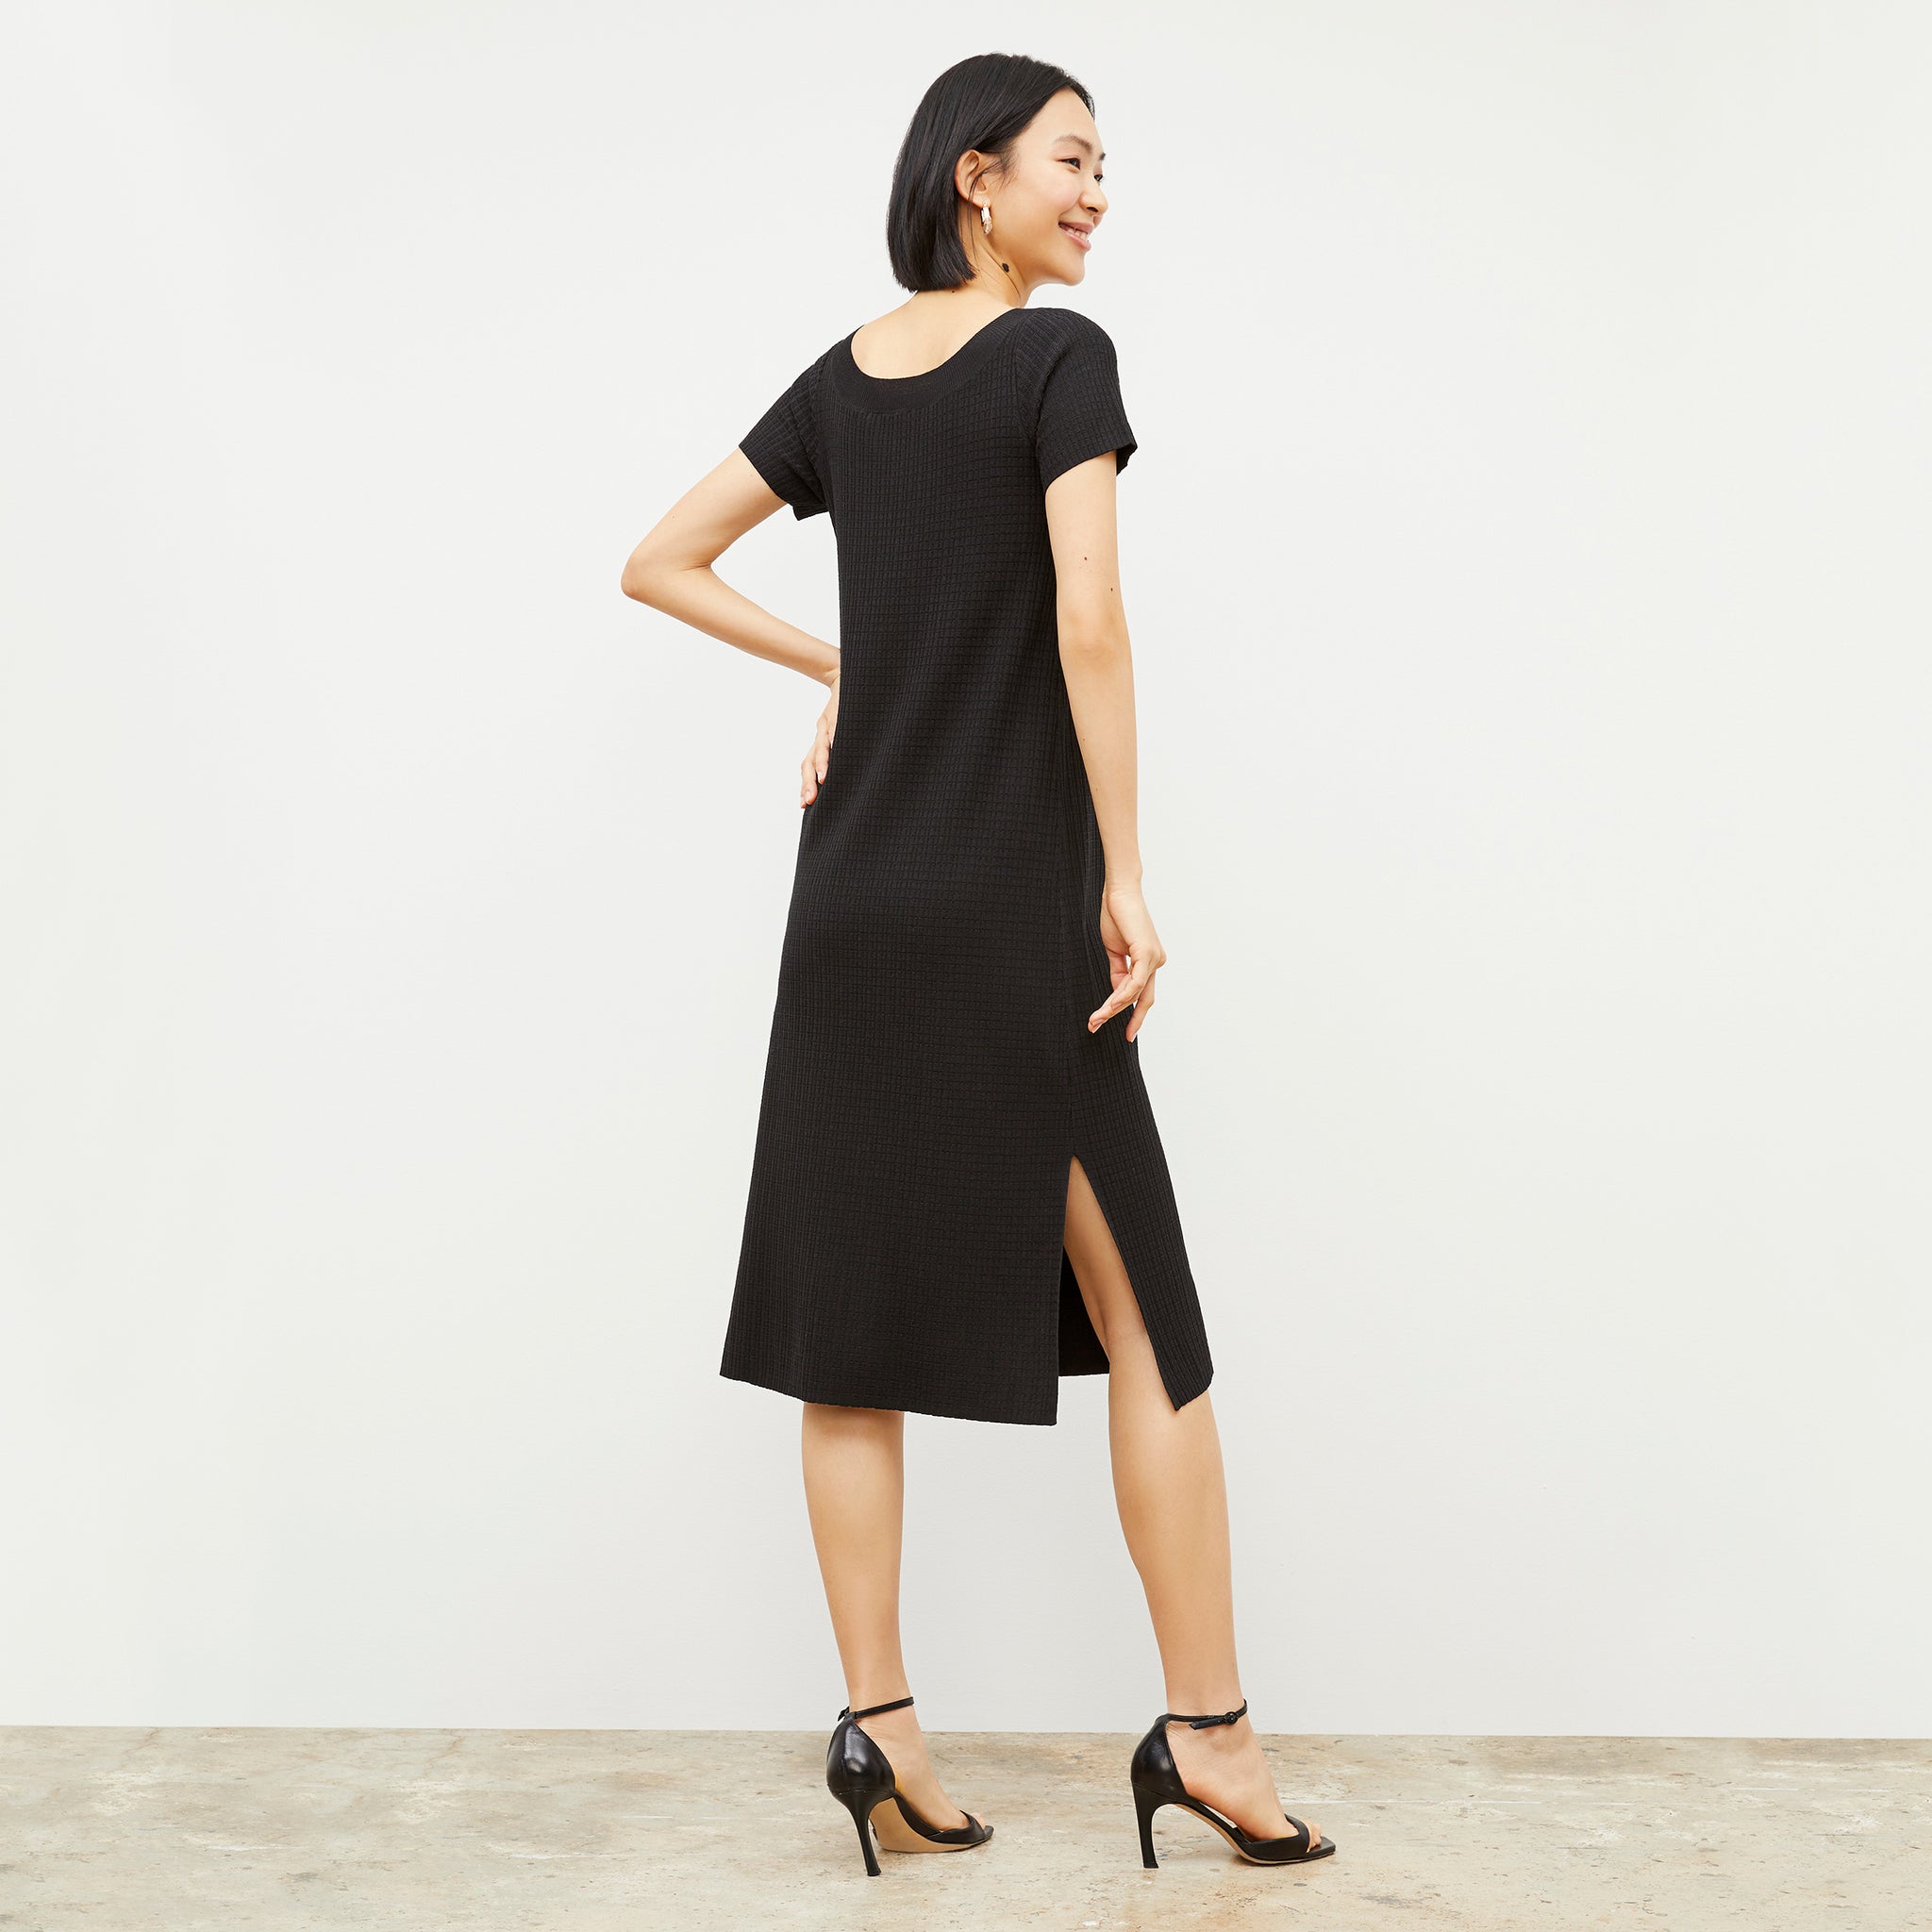 Back image of a woman wearing the Danica Dress - Geo Micro Knit in Black